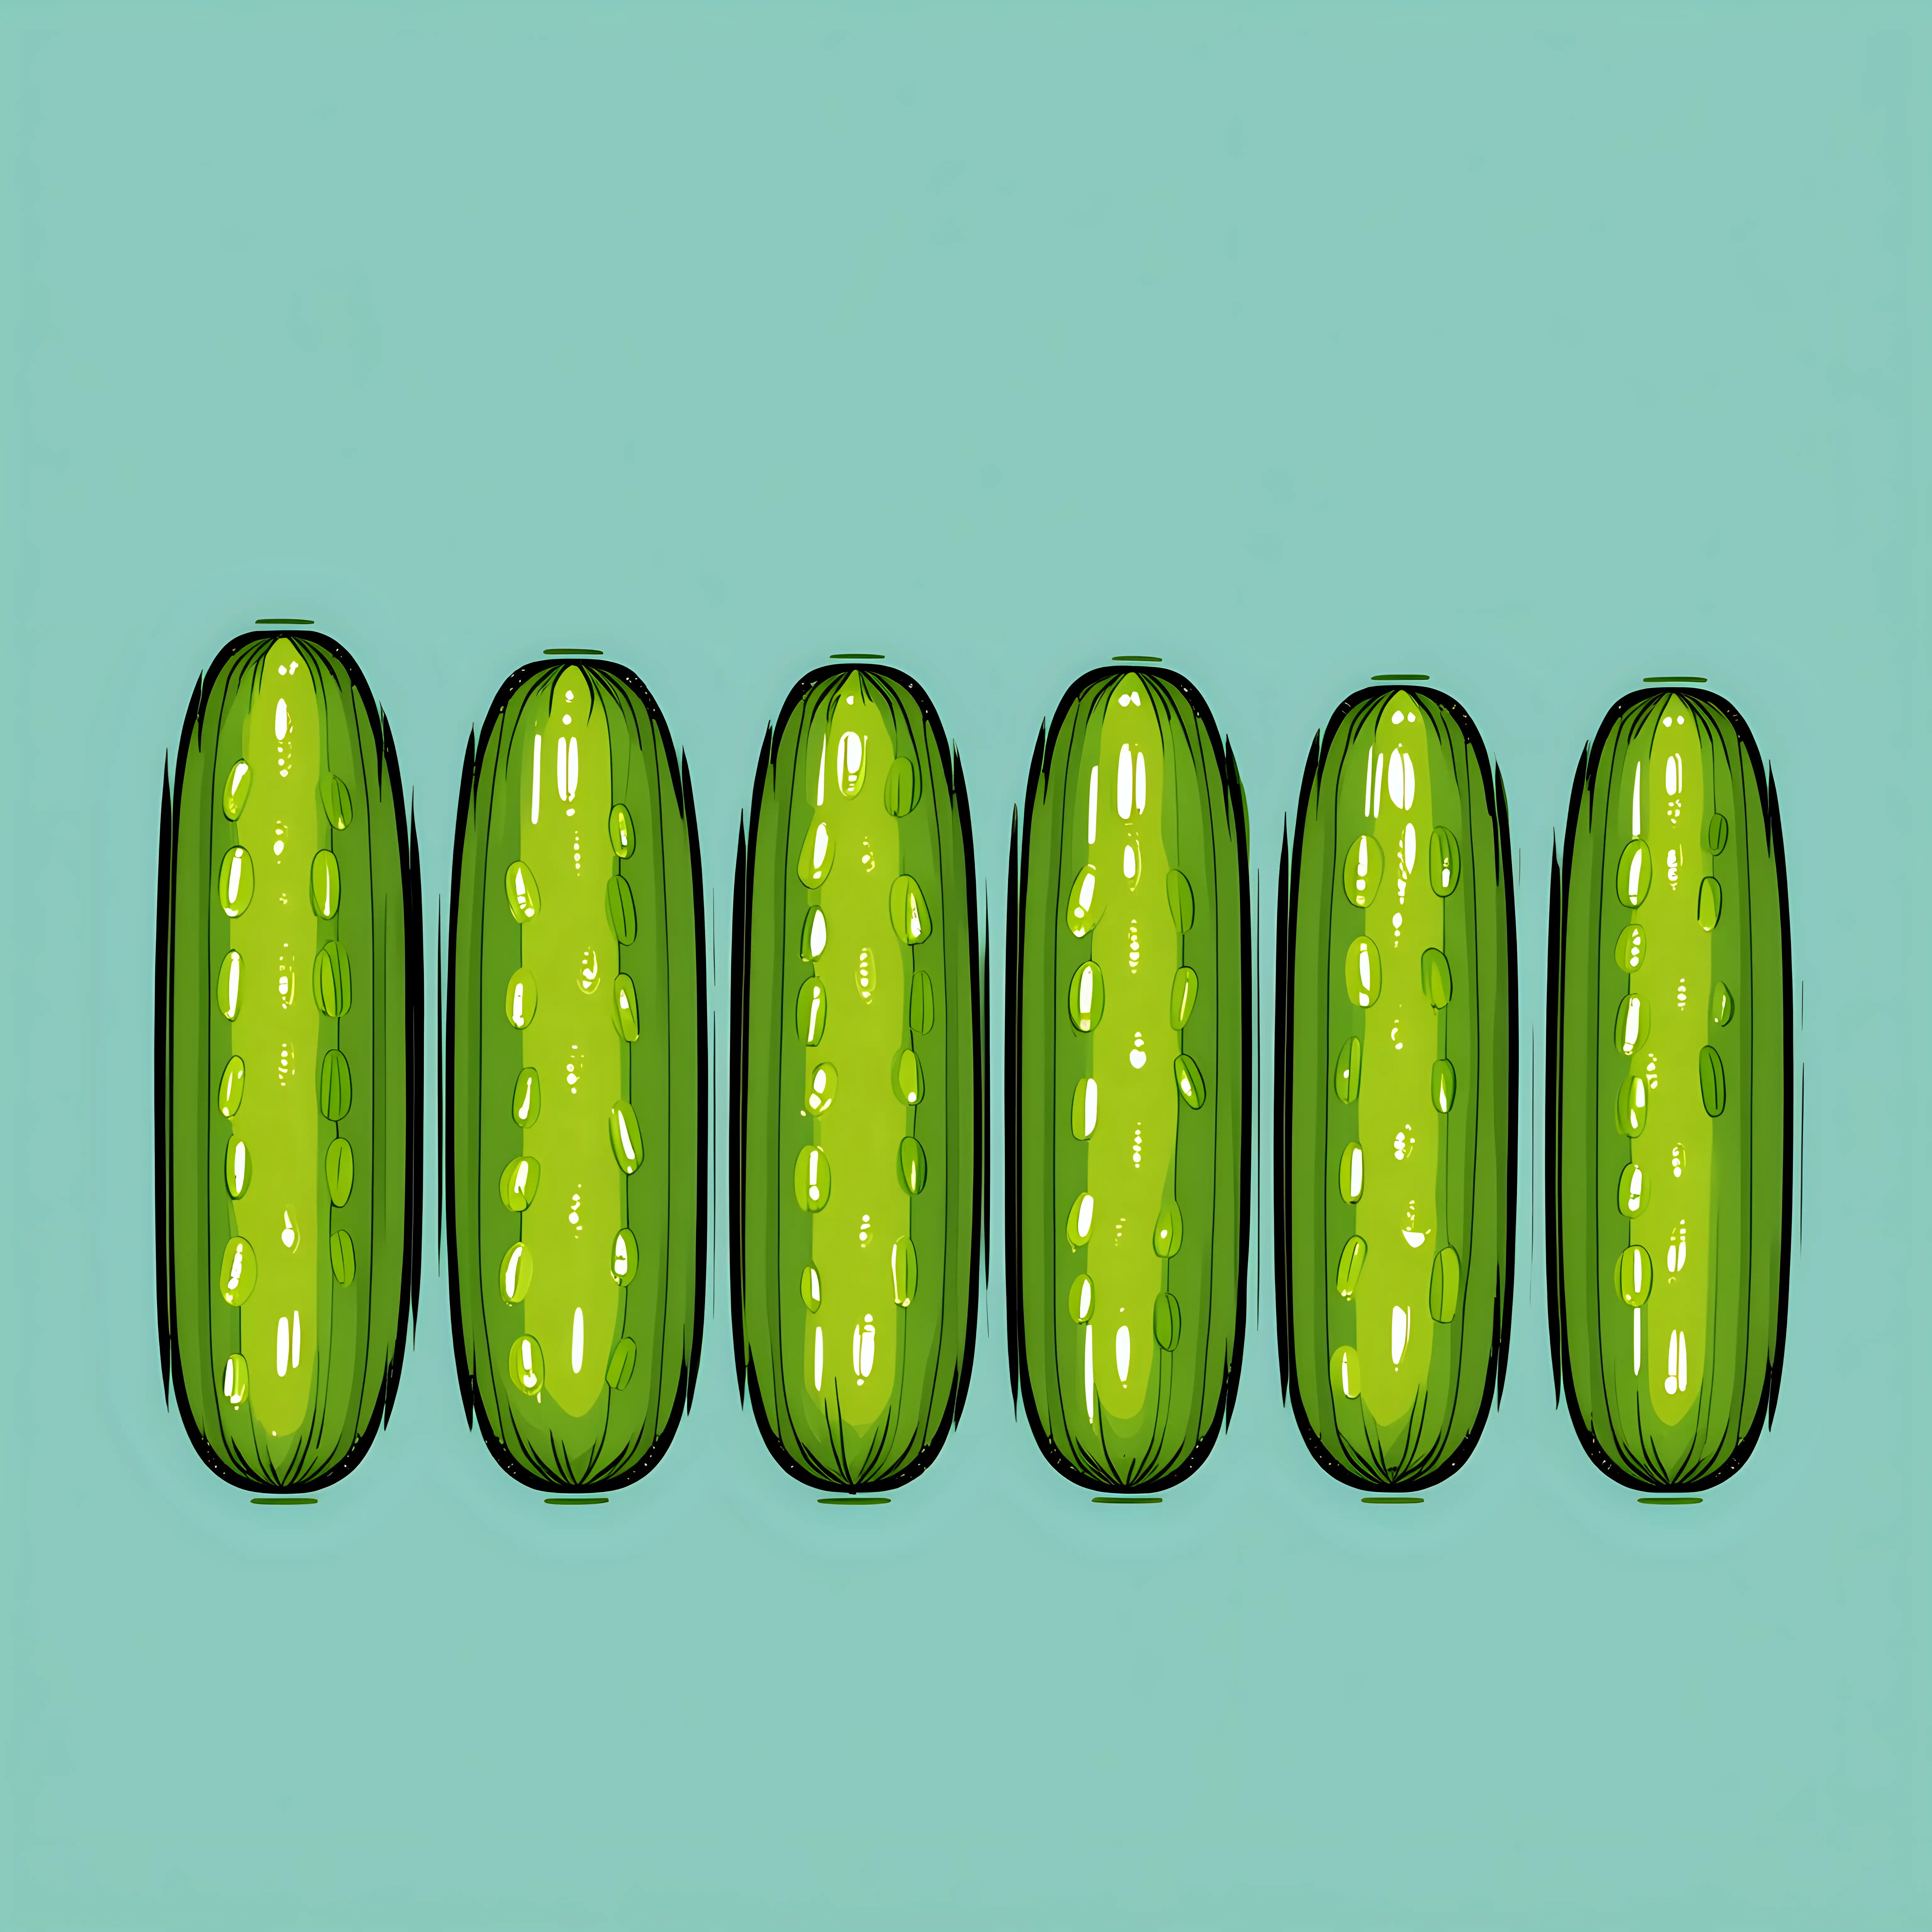 color line drawing of 5 thin pickles in a line